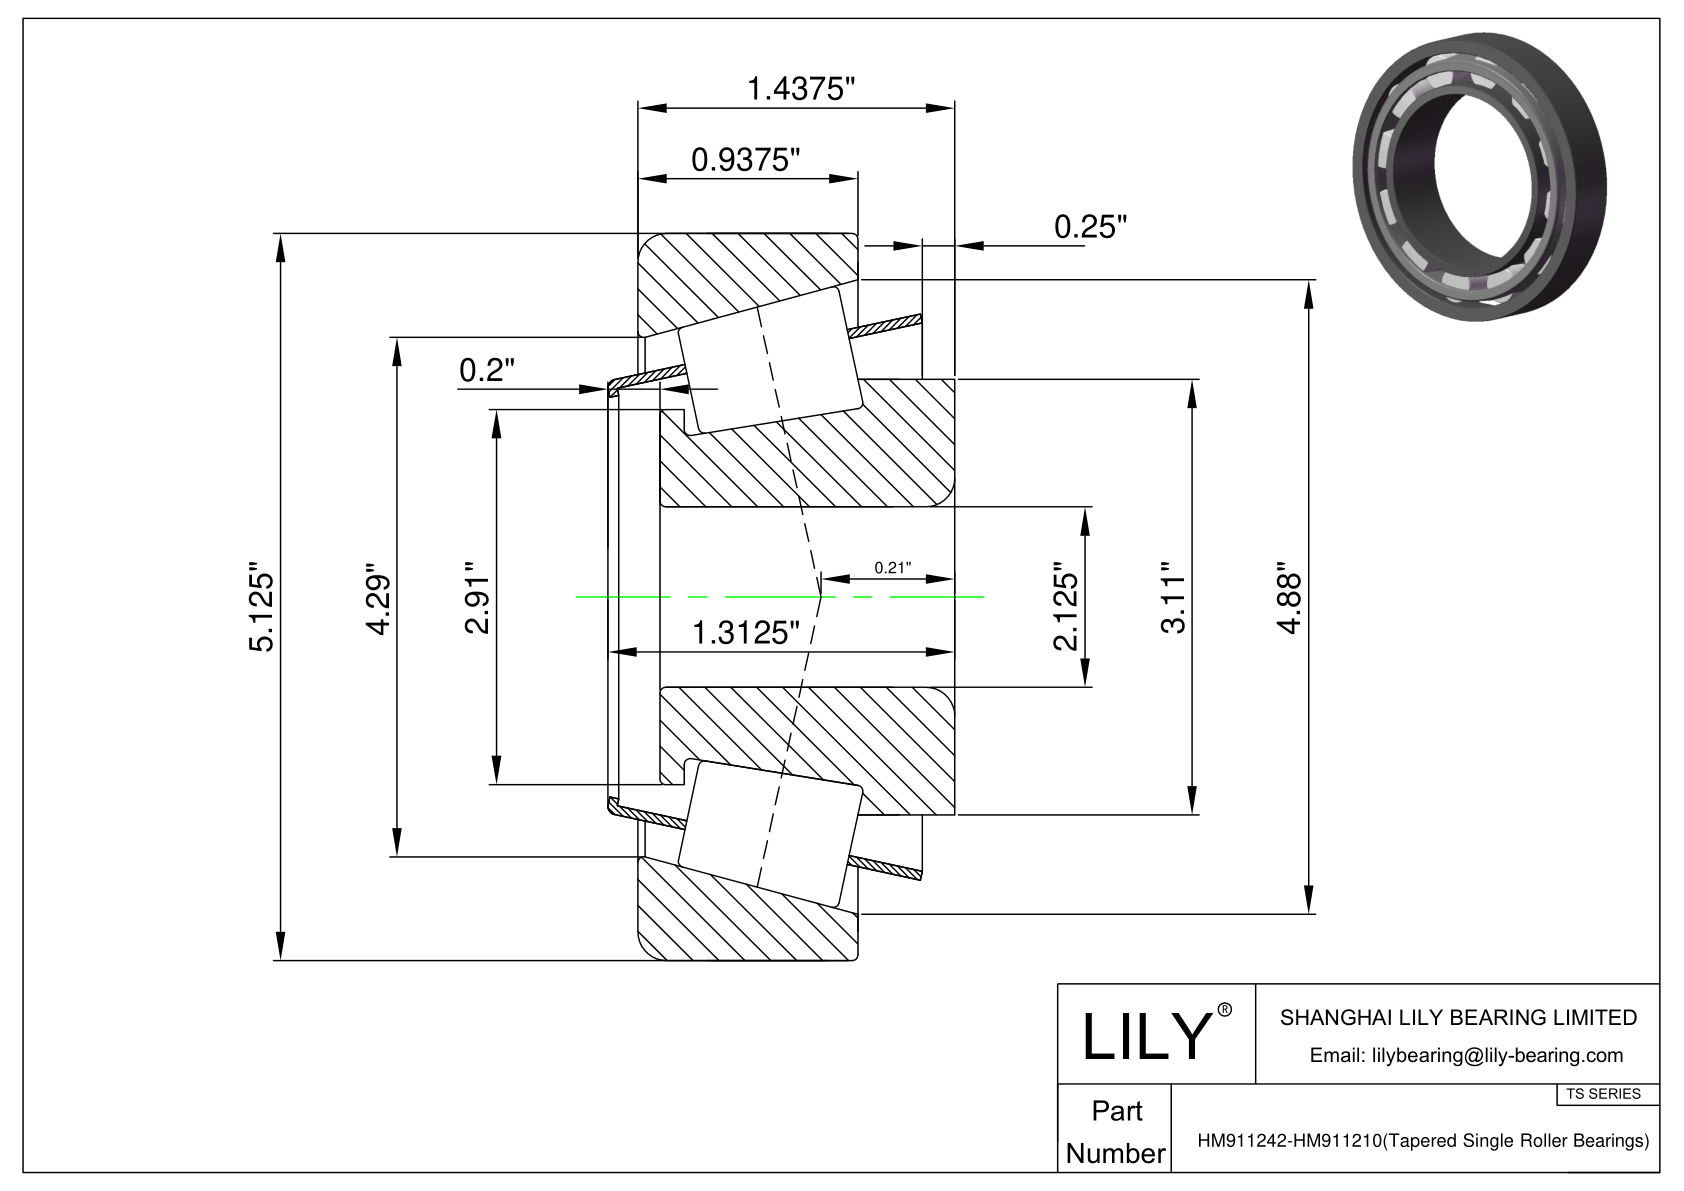 HM911242-HM911210 TS (Tapered Single Roller Bearings) (Imperial) cad drawing